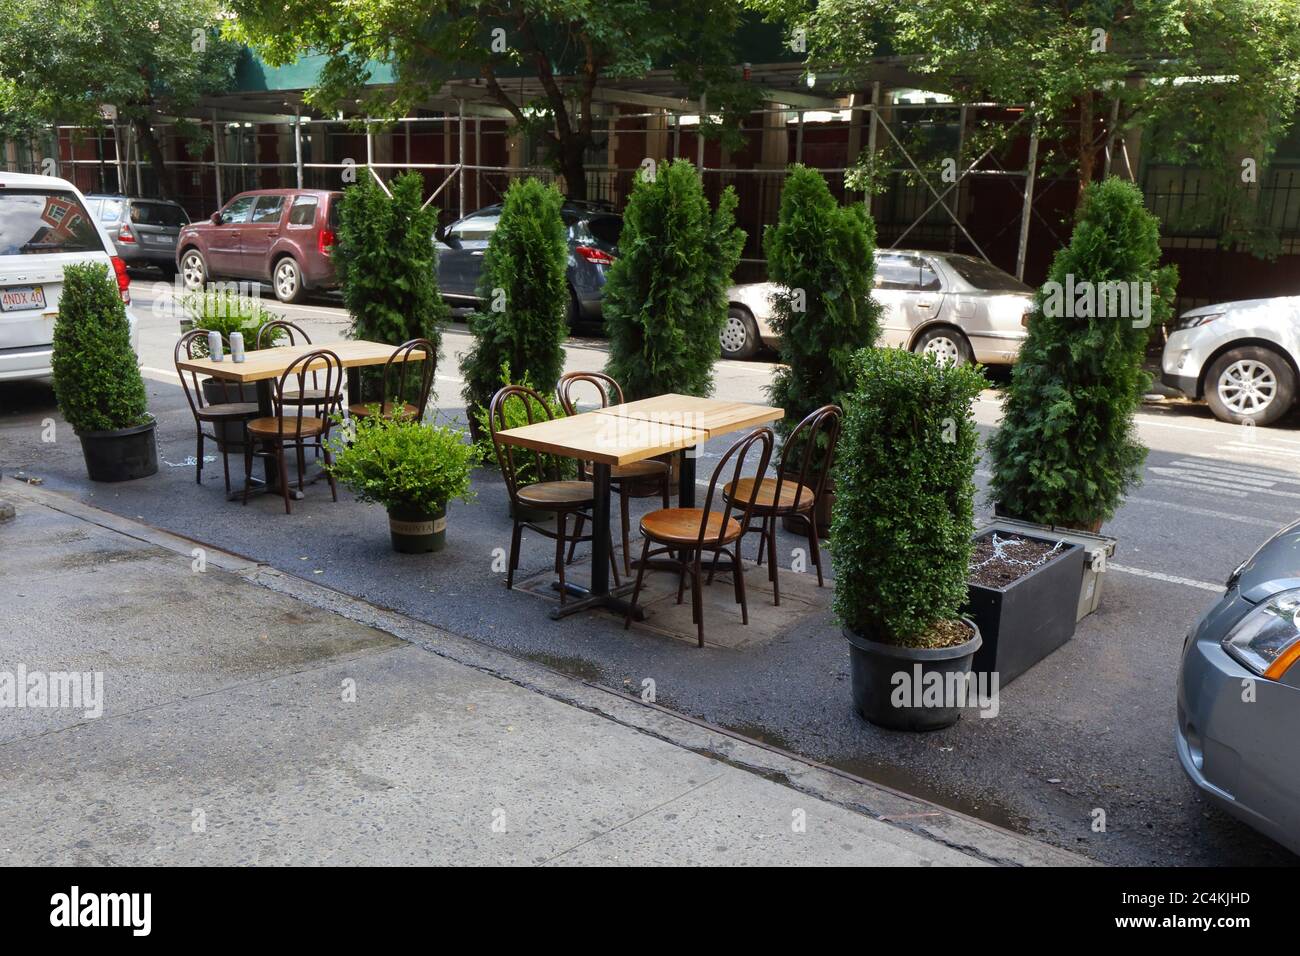 New York, NY. June 26, 2020. A parklet setup outside an East Village restaurant for socially distanced outdoor dining under Phase 2 reopening of New York City. Some restaurants and bars have expanded capacity by converting parking lanes into parklets, sidewalk extensions onto the roadway for dining and leisure, and not for car storage. Stock Photo